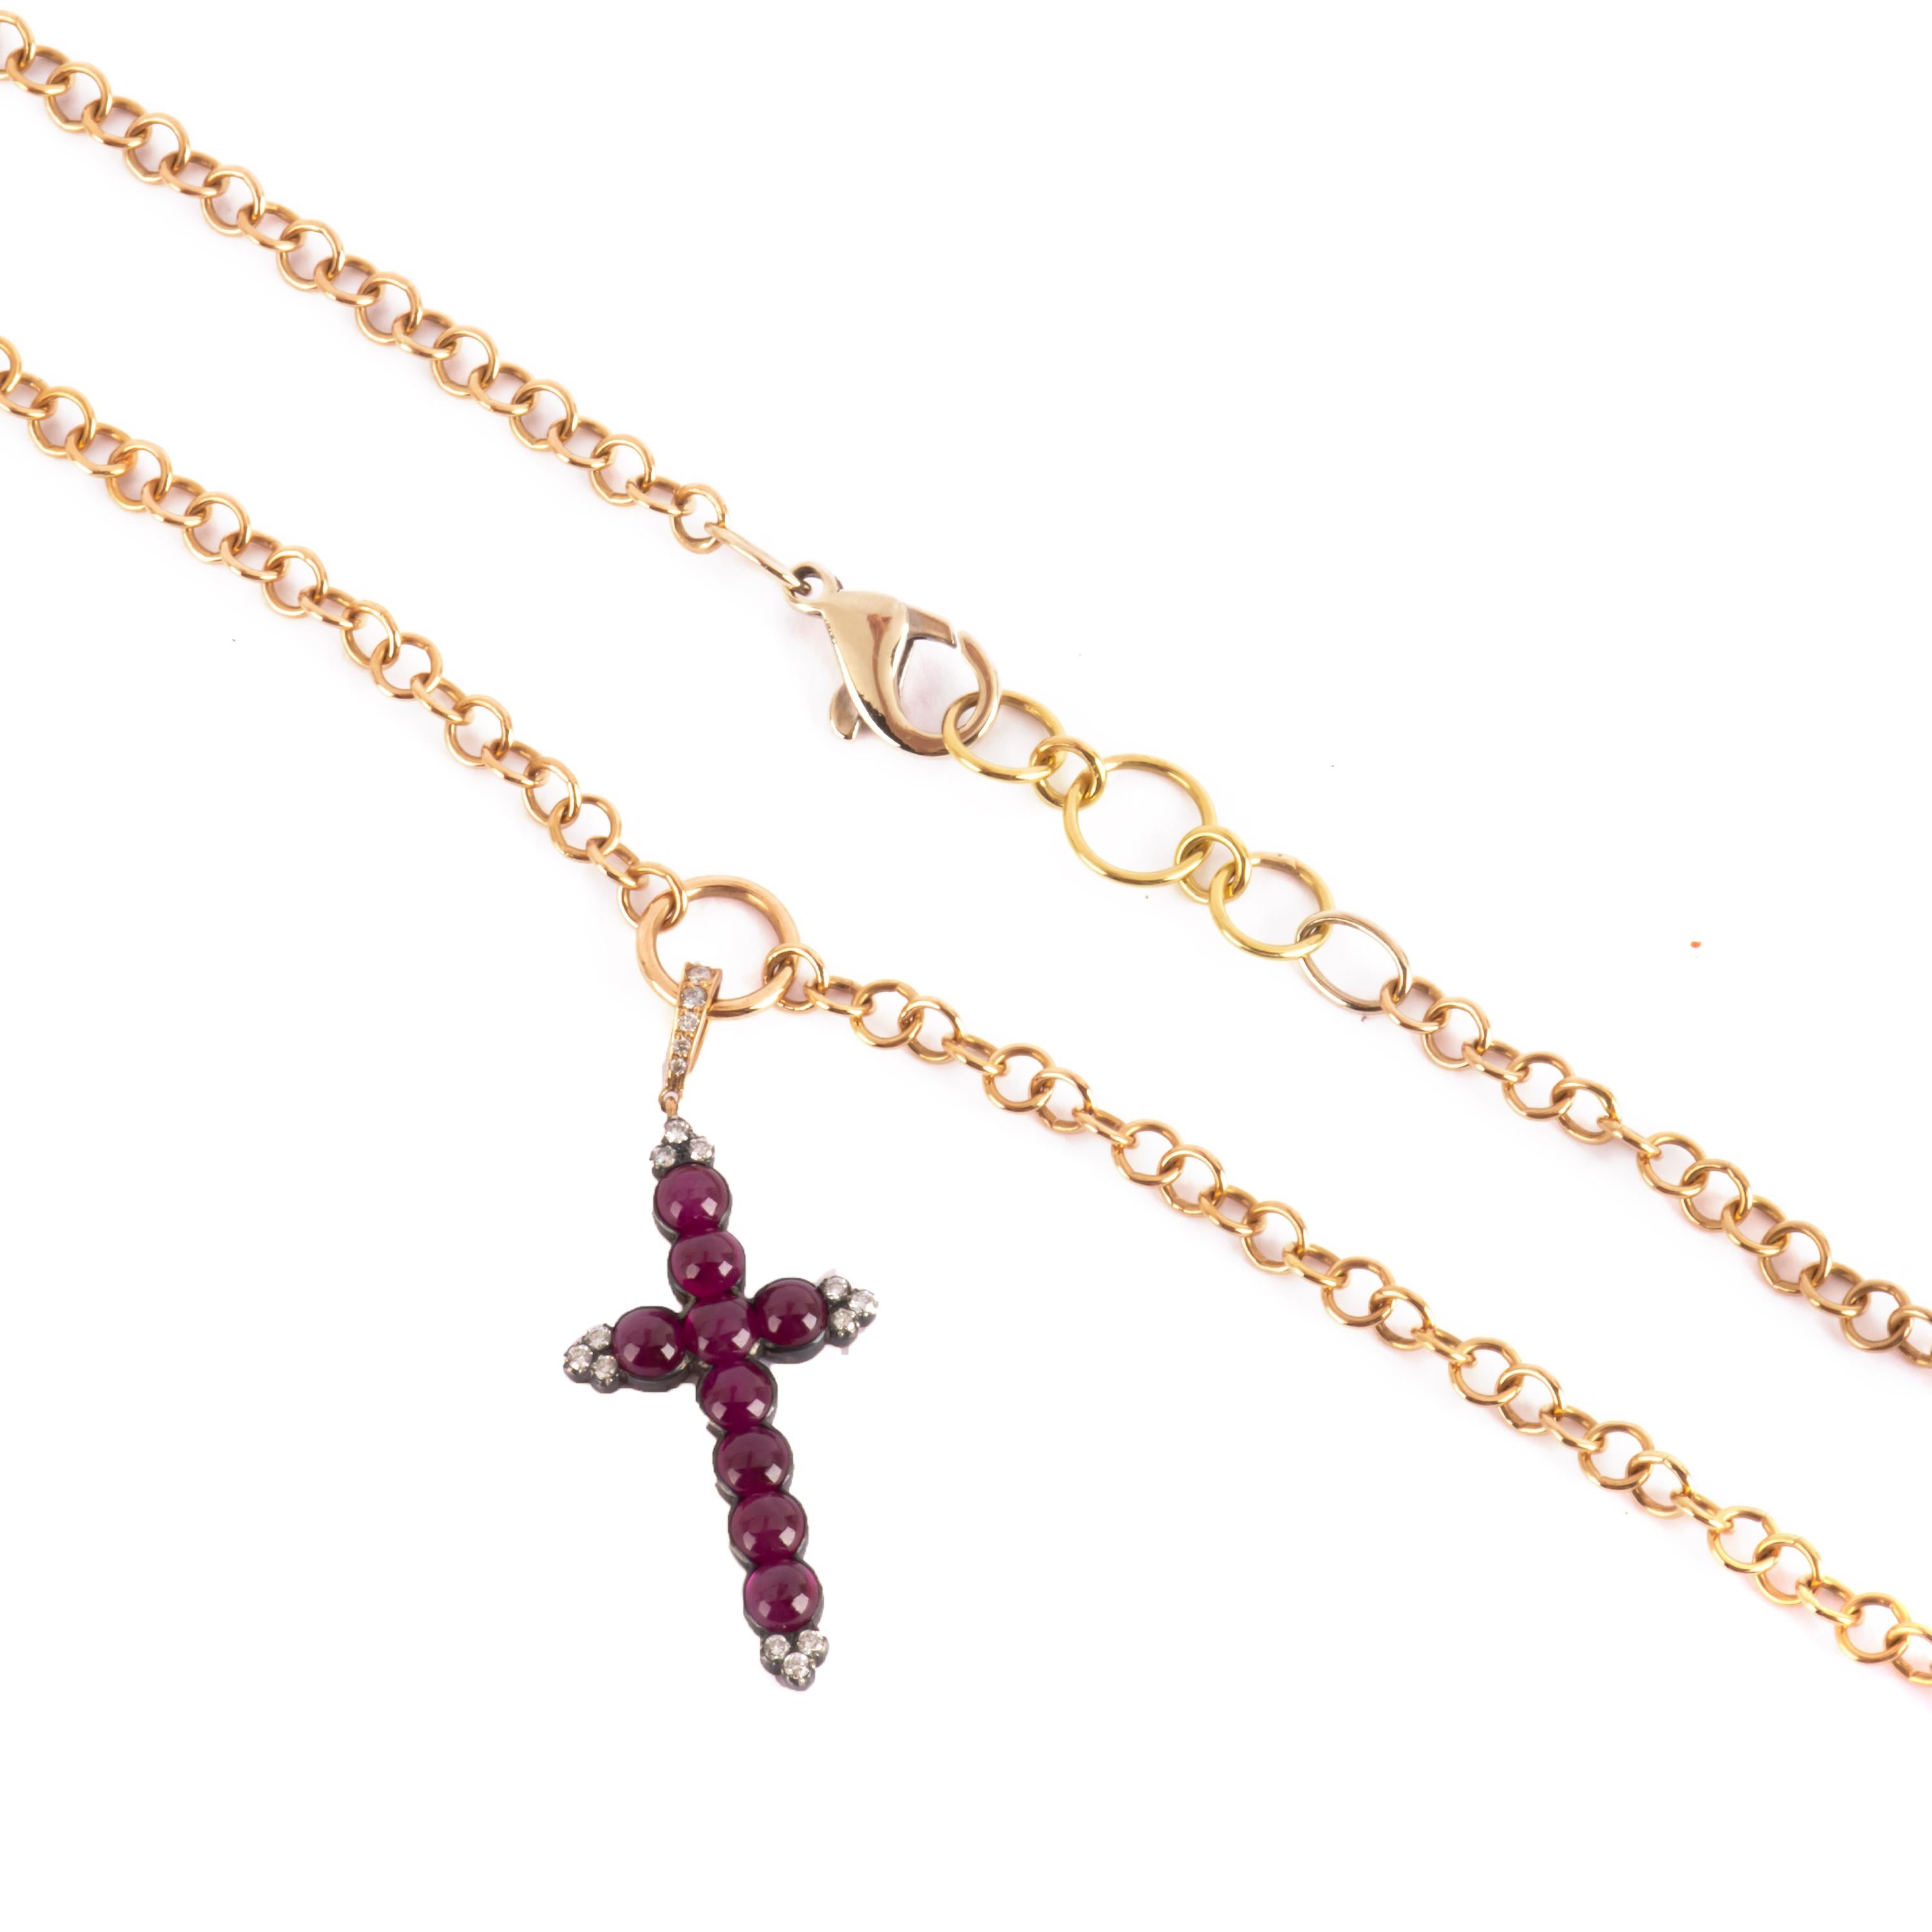 Cabochon ruby and diamond pendant necklace in red 18kt gold made by Busatti Milano.